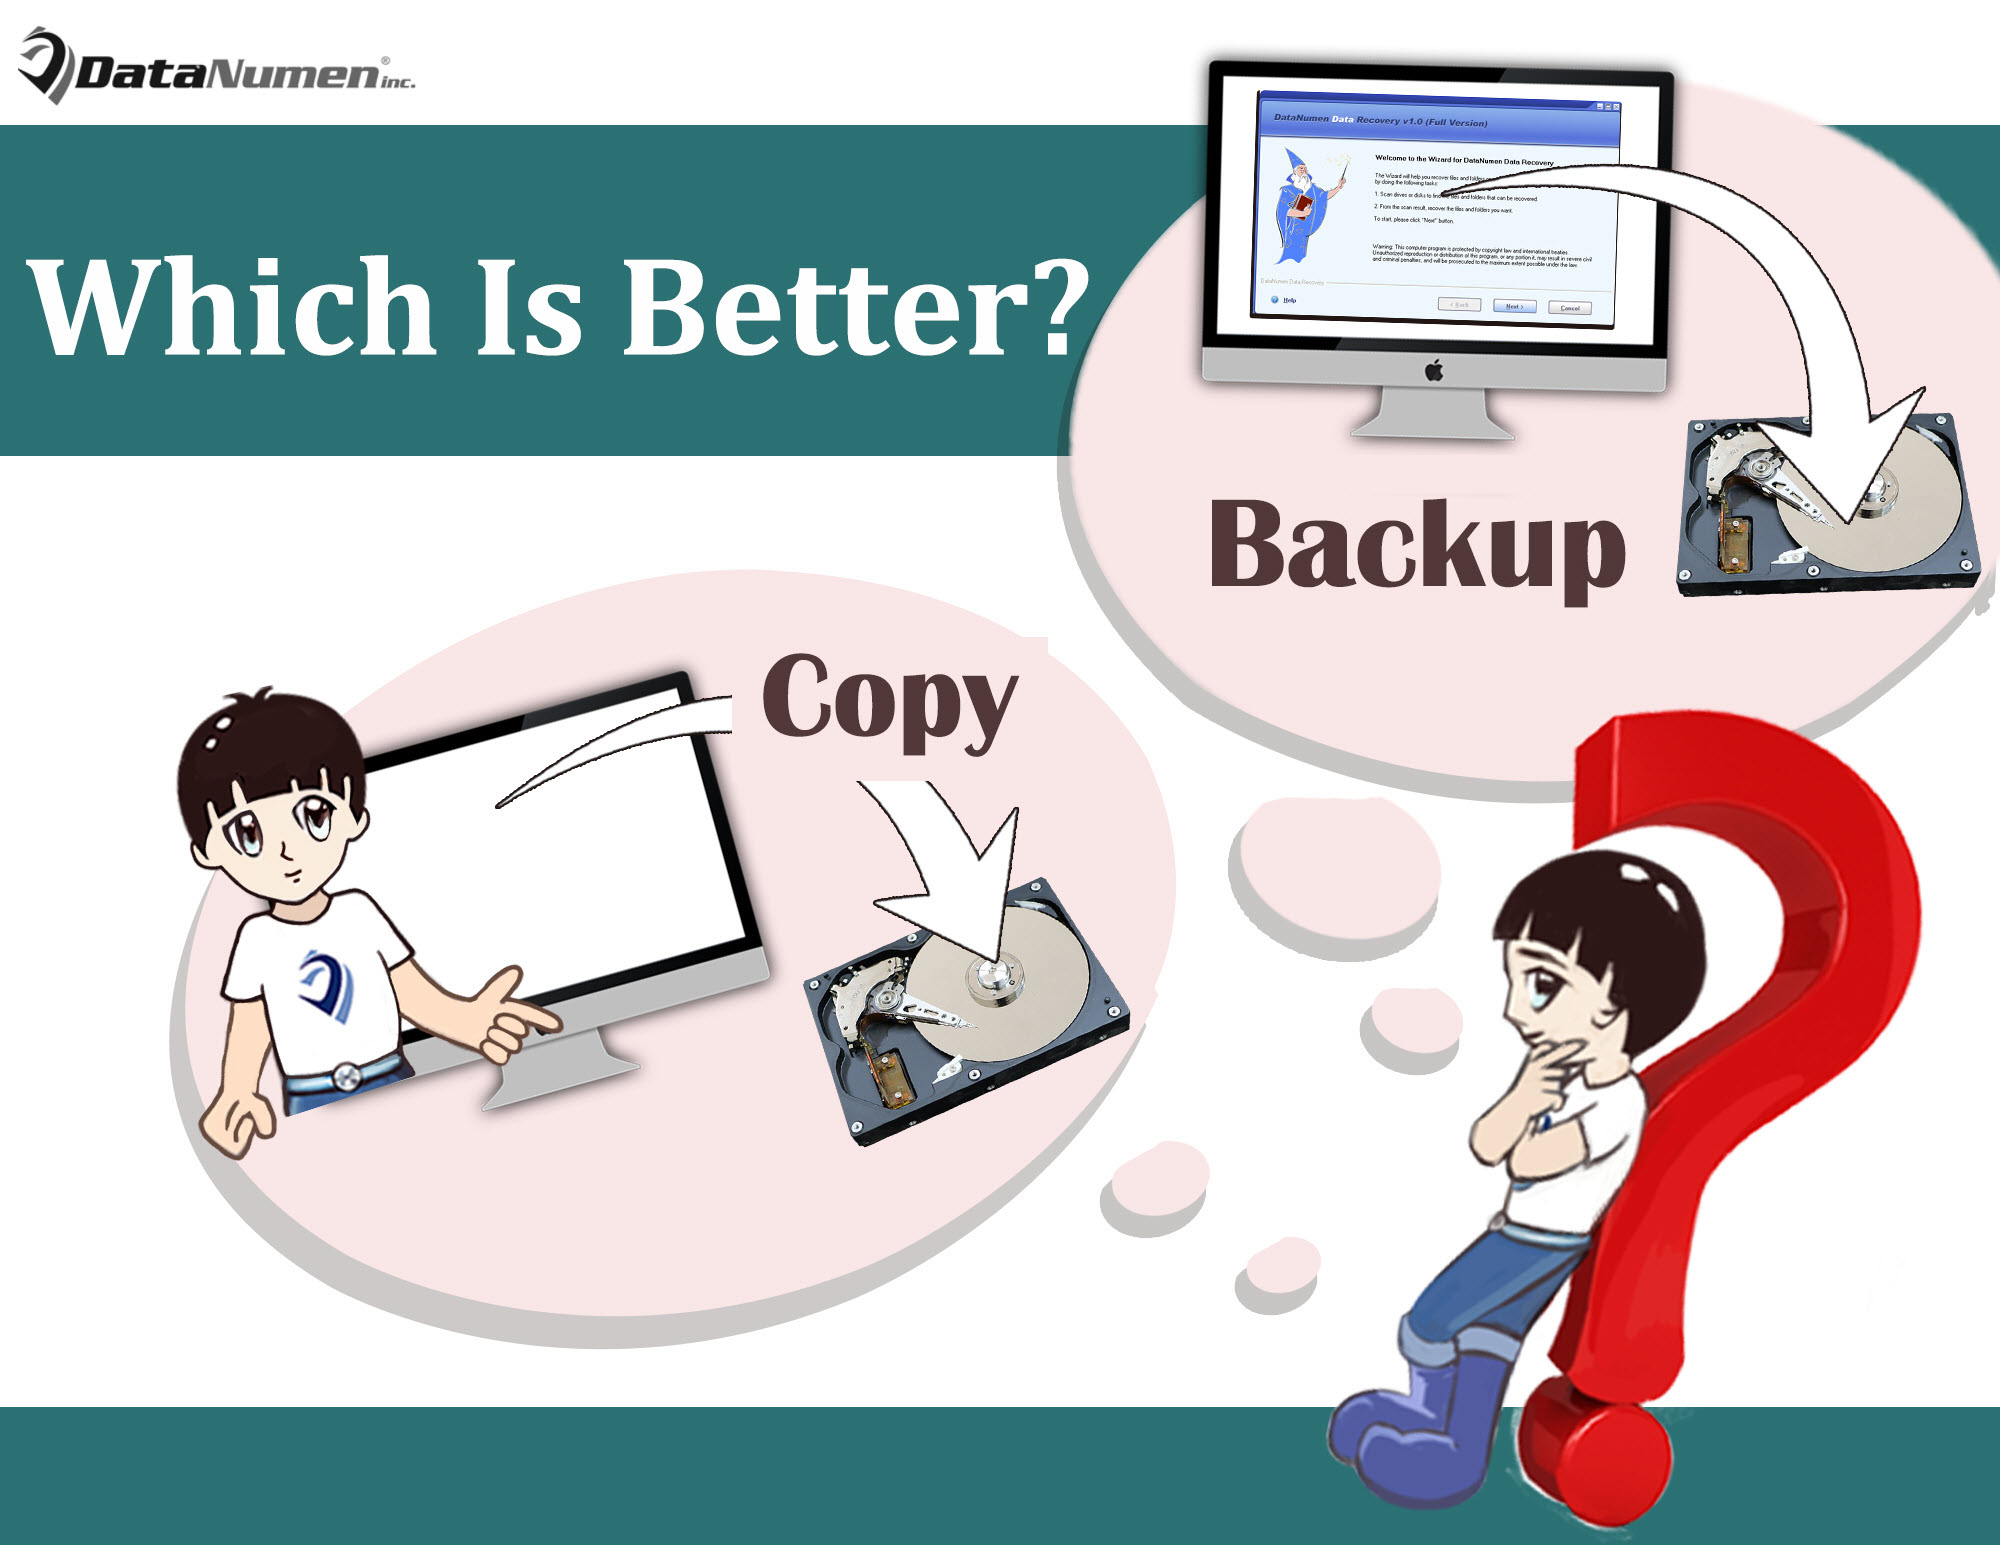 Copy vs Backup: Which Is Better for Backing up Your PC?